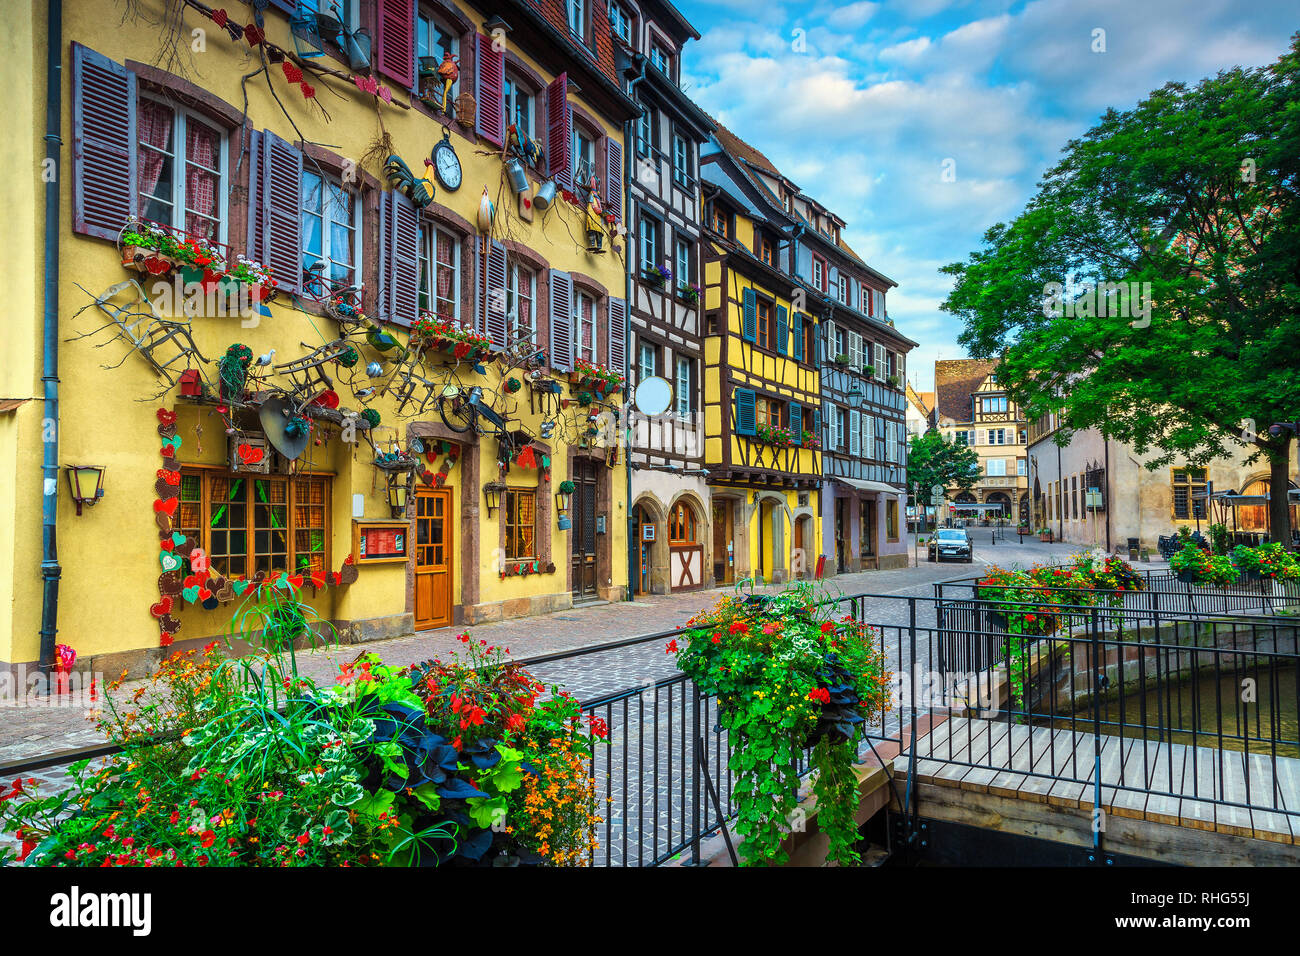 Fantastic travel destination, amazing colorful traditional French houses and decorated street with beautiful flowers, Colmar, France, Europe Stock Photo